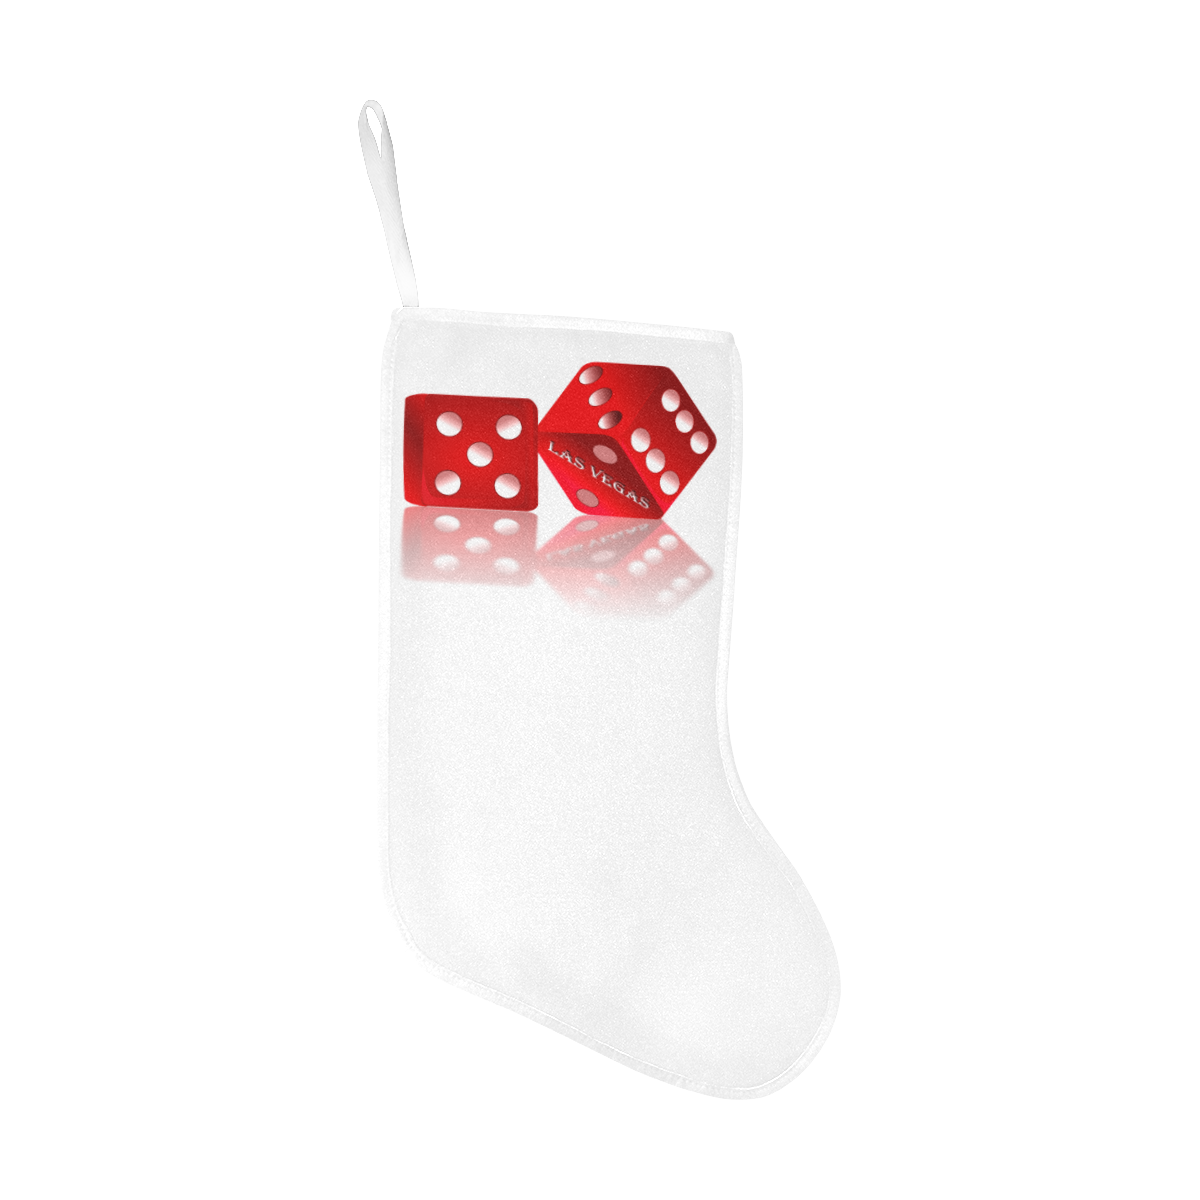 Las Vegas Craps Dice Christmas Stocking (Without Folded Top)